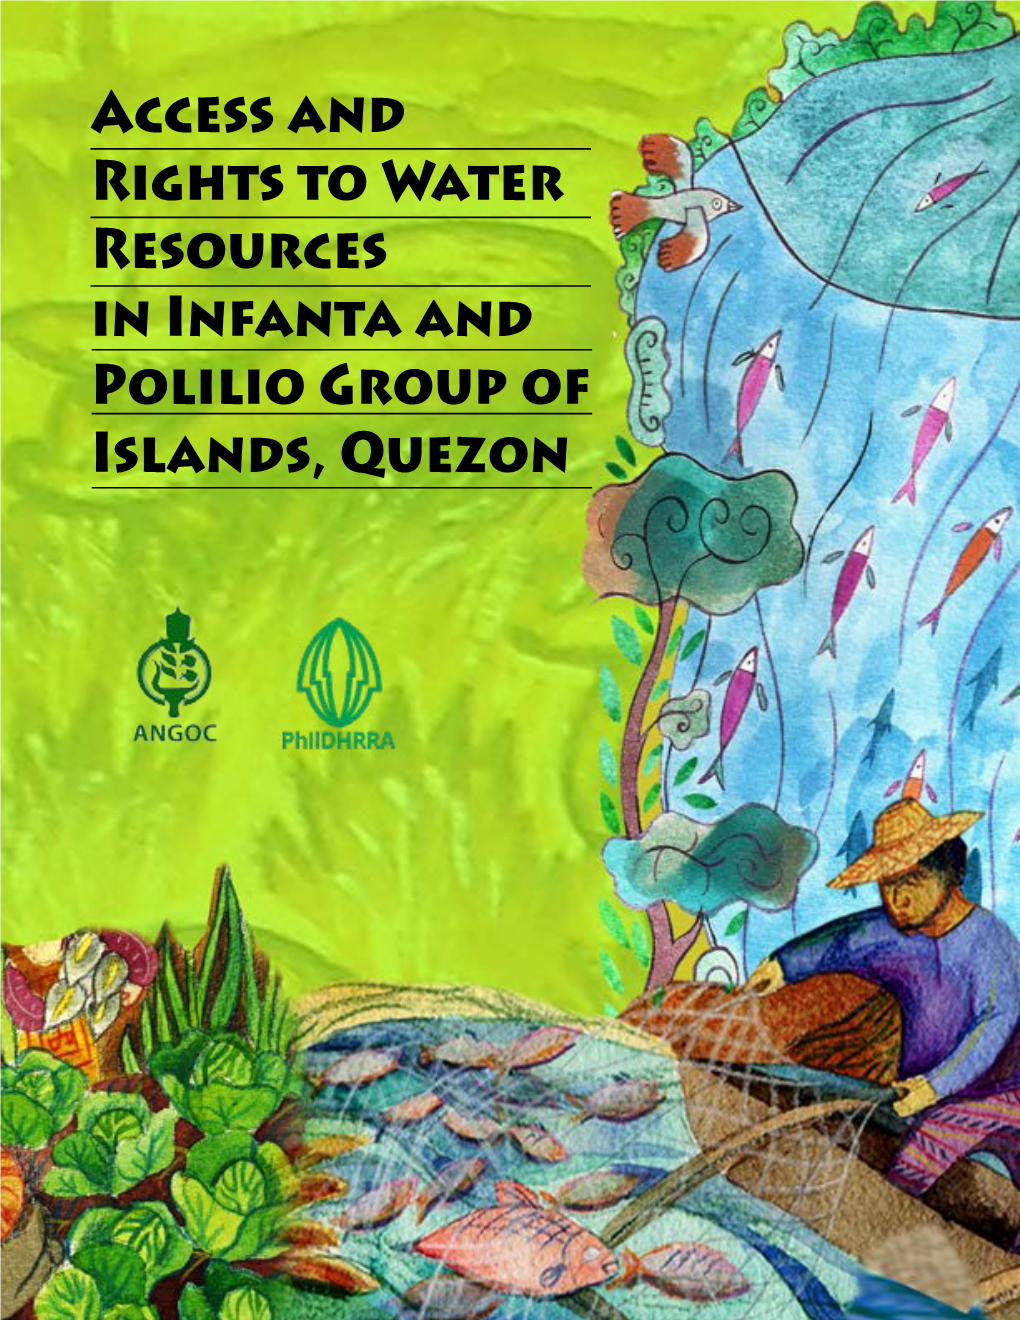 Access and Rights to Water Resources in Infanta and Polilio Group of Islands, Quezon